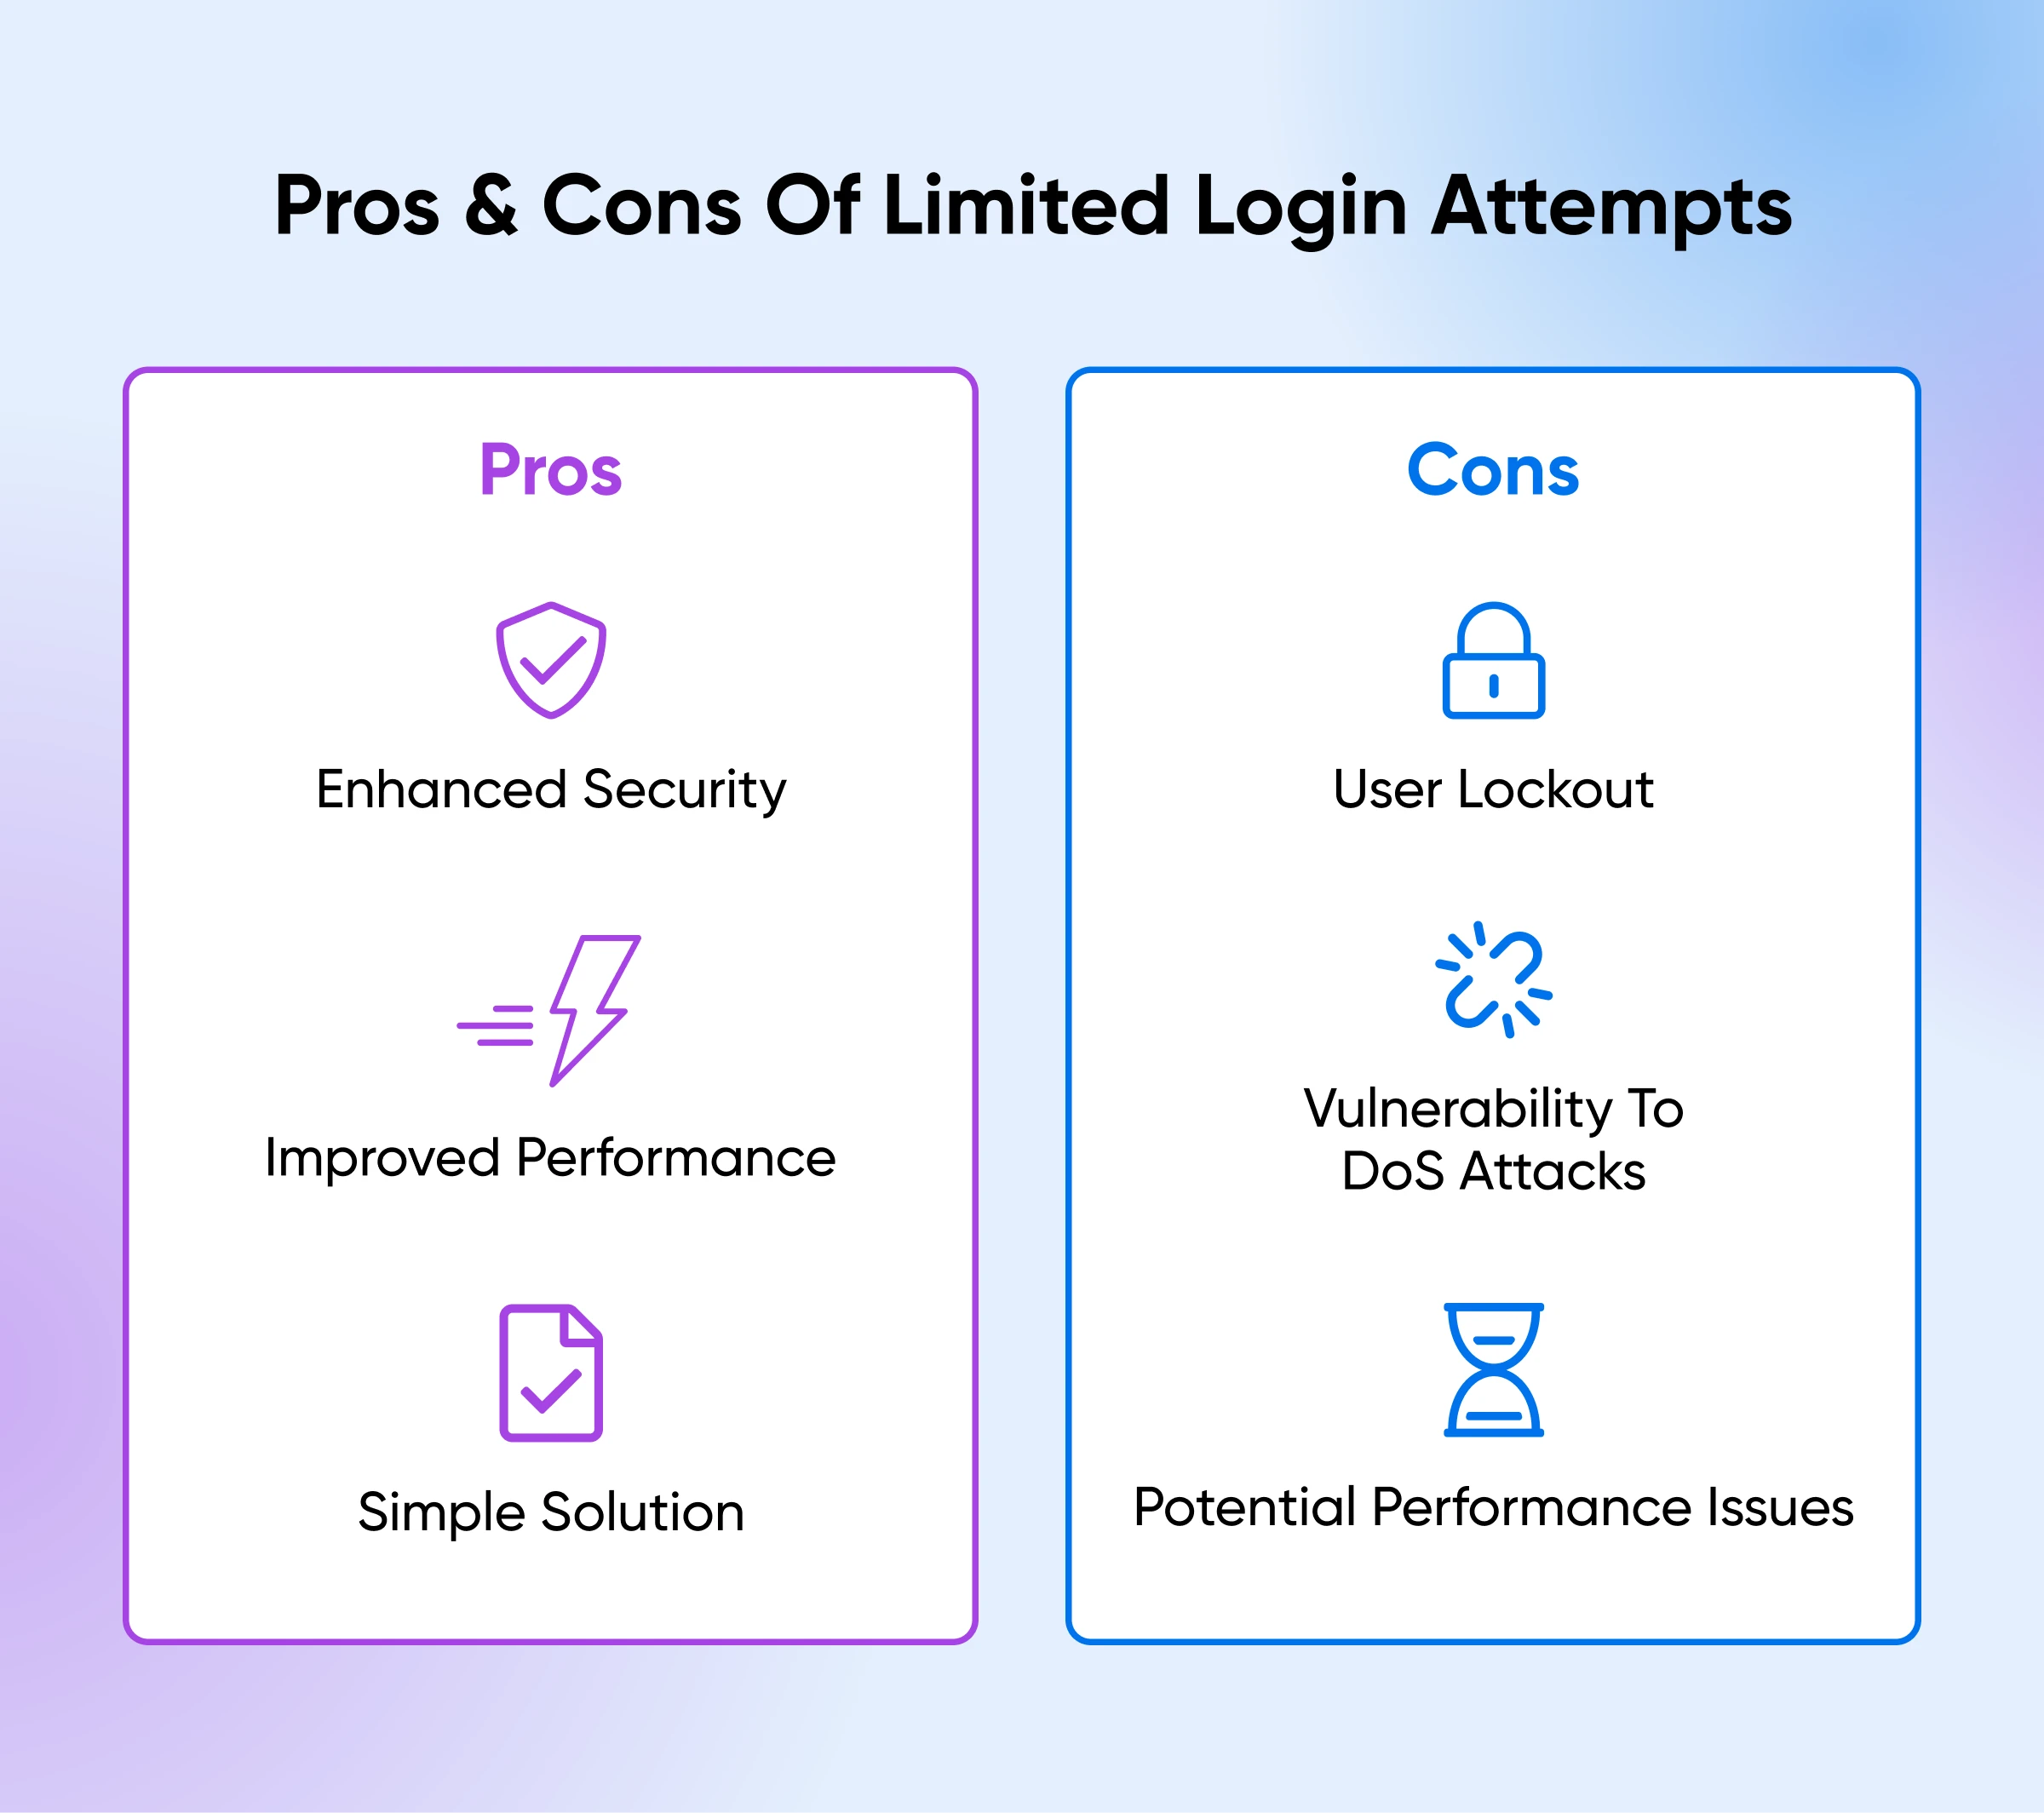 Pros (security, better performance, easy solution) and cons (user lockout, performance issues) of limited login attempts.